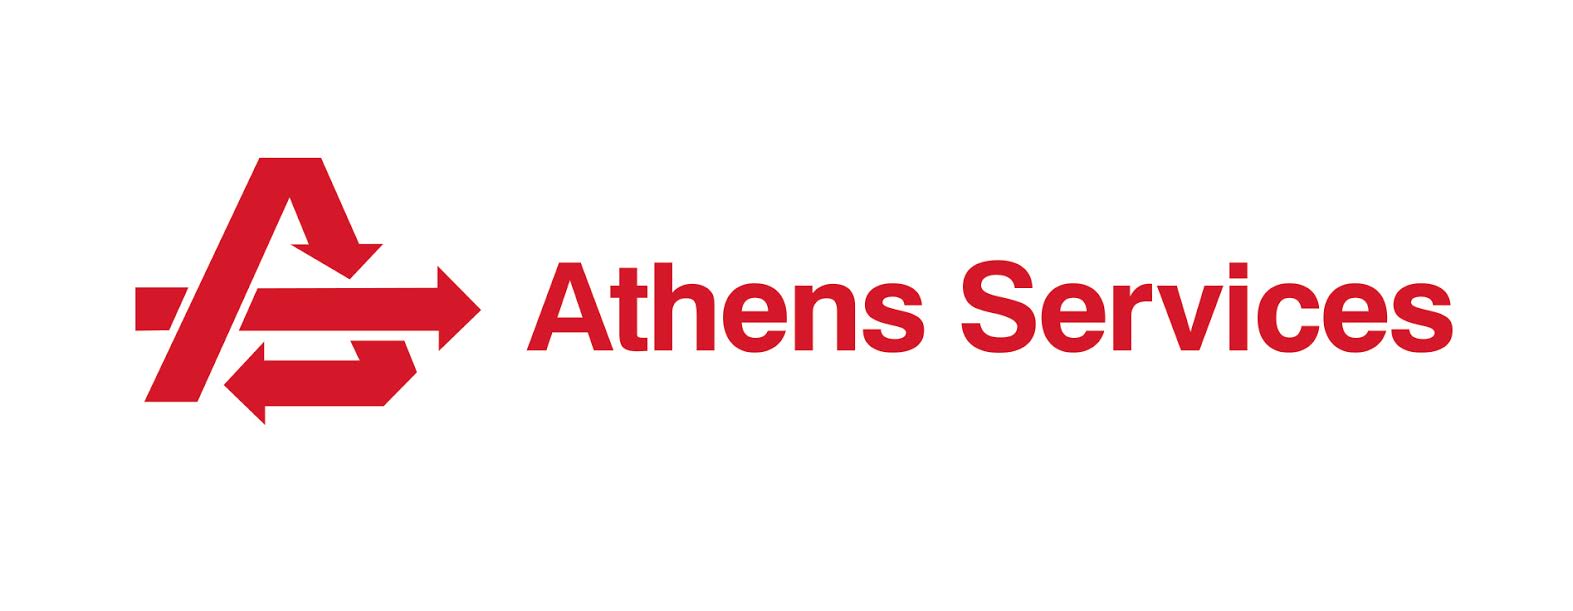 Athens-Services